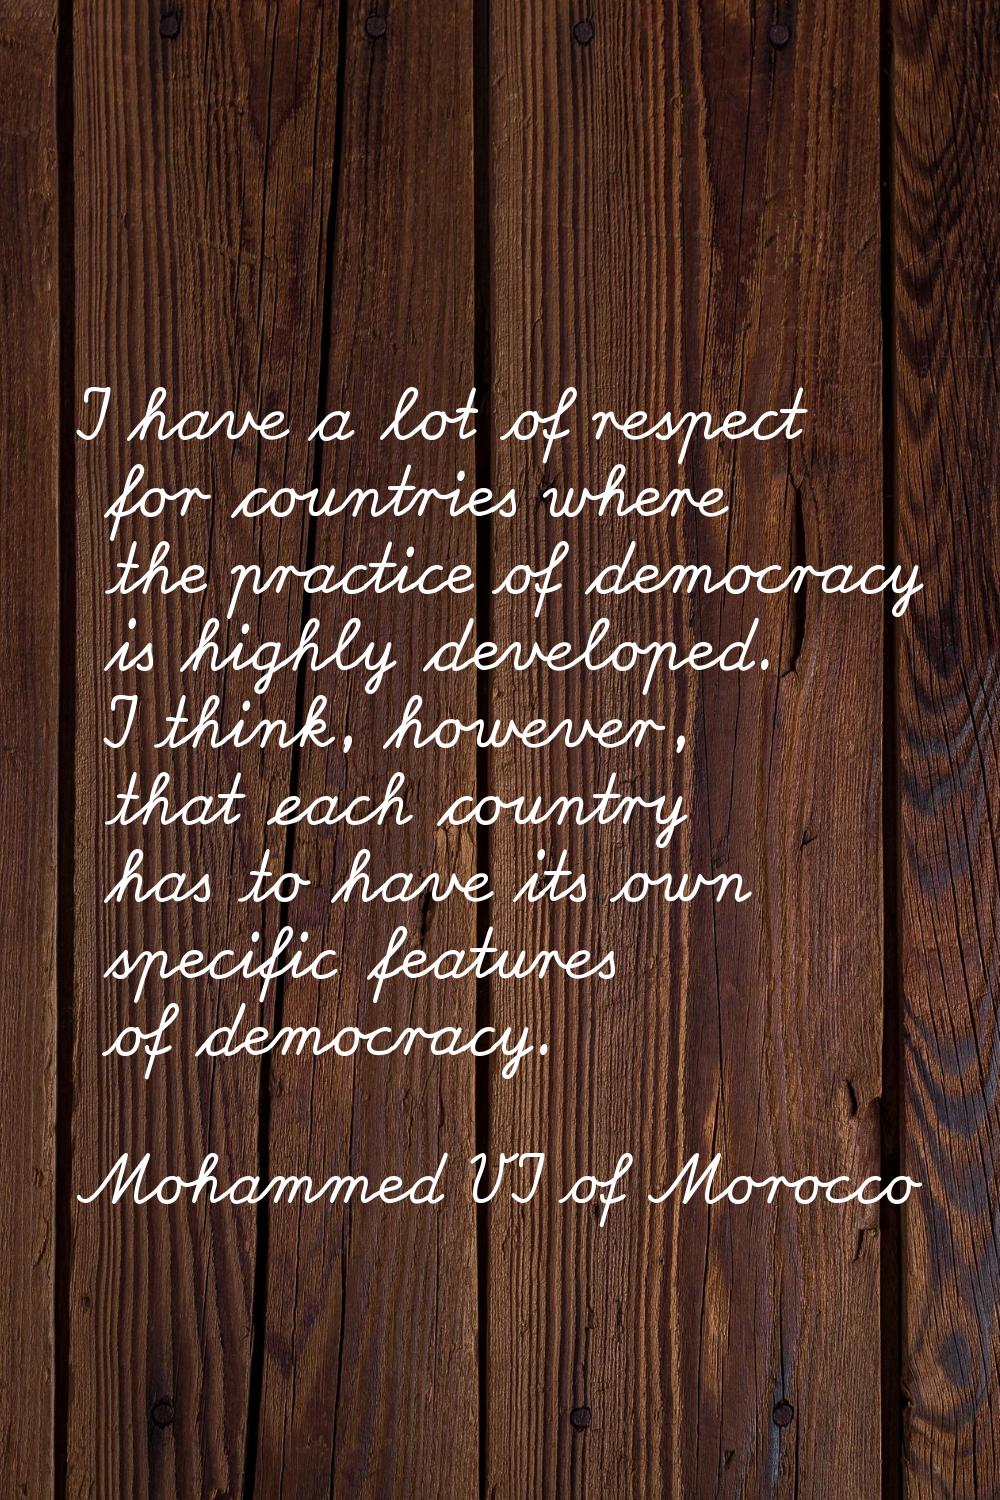 I have a lot of respect for countries where the practice of democracy is highly developed. I think,